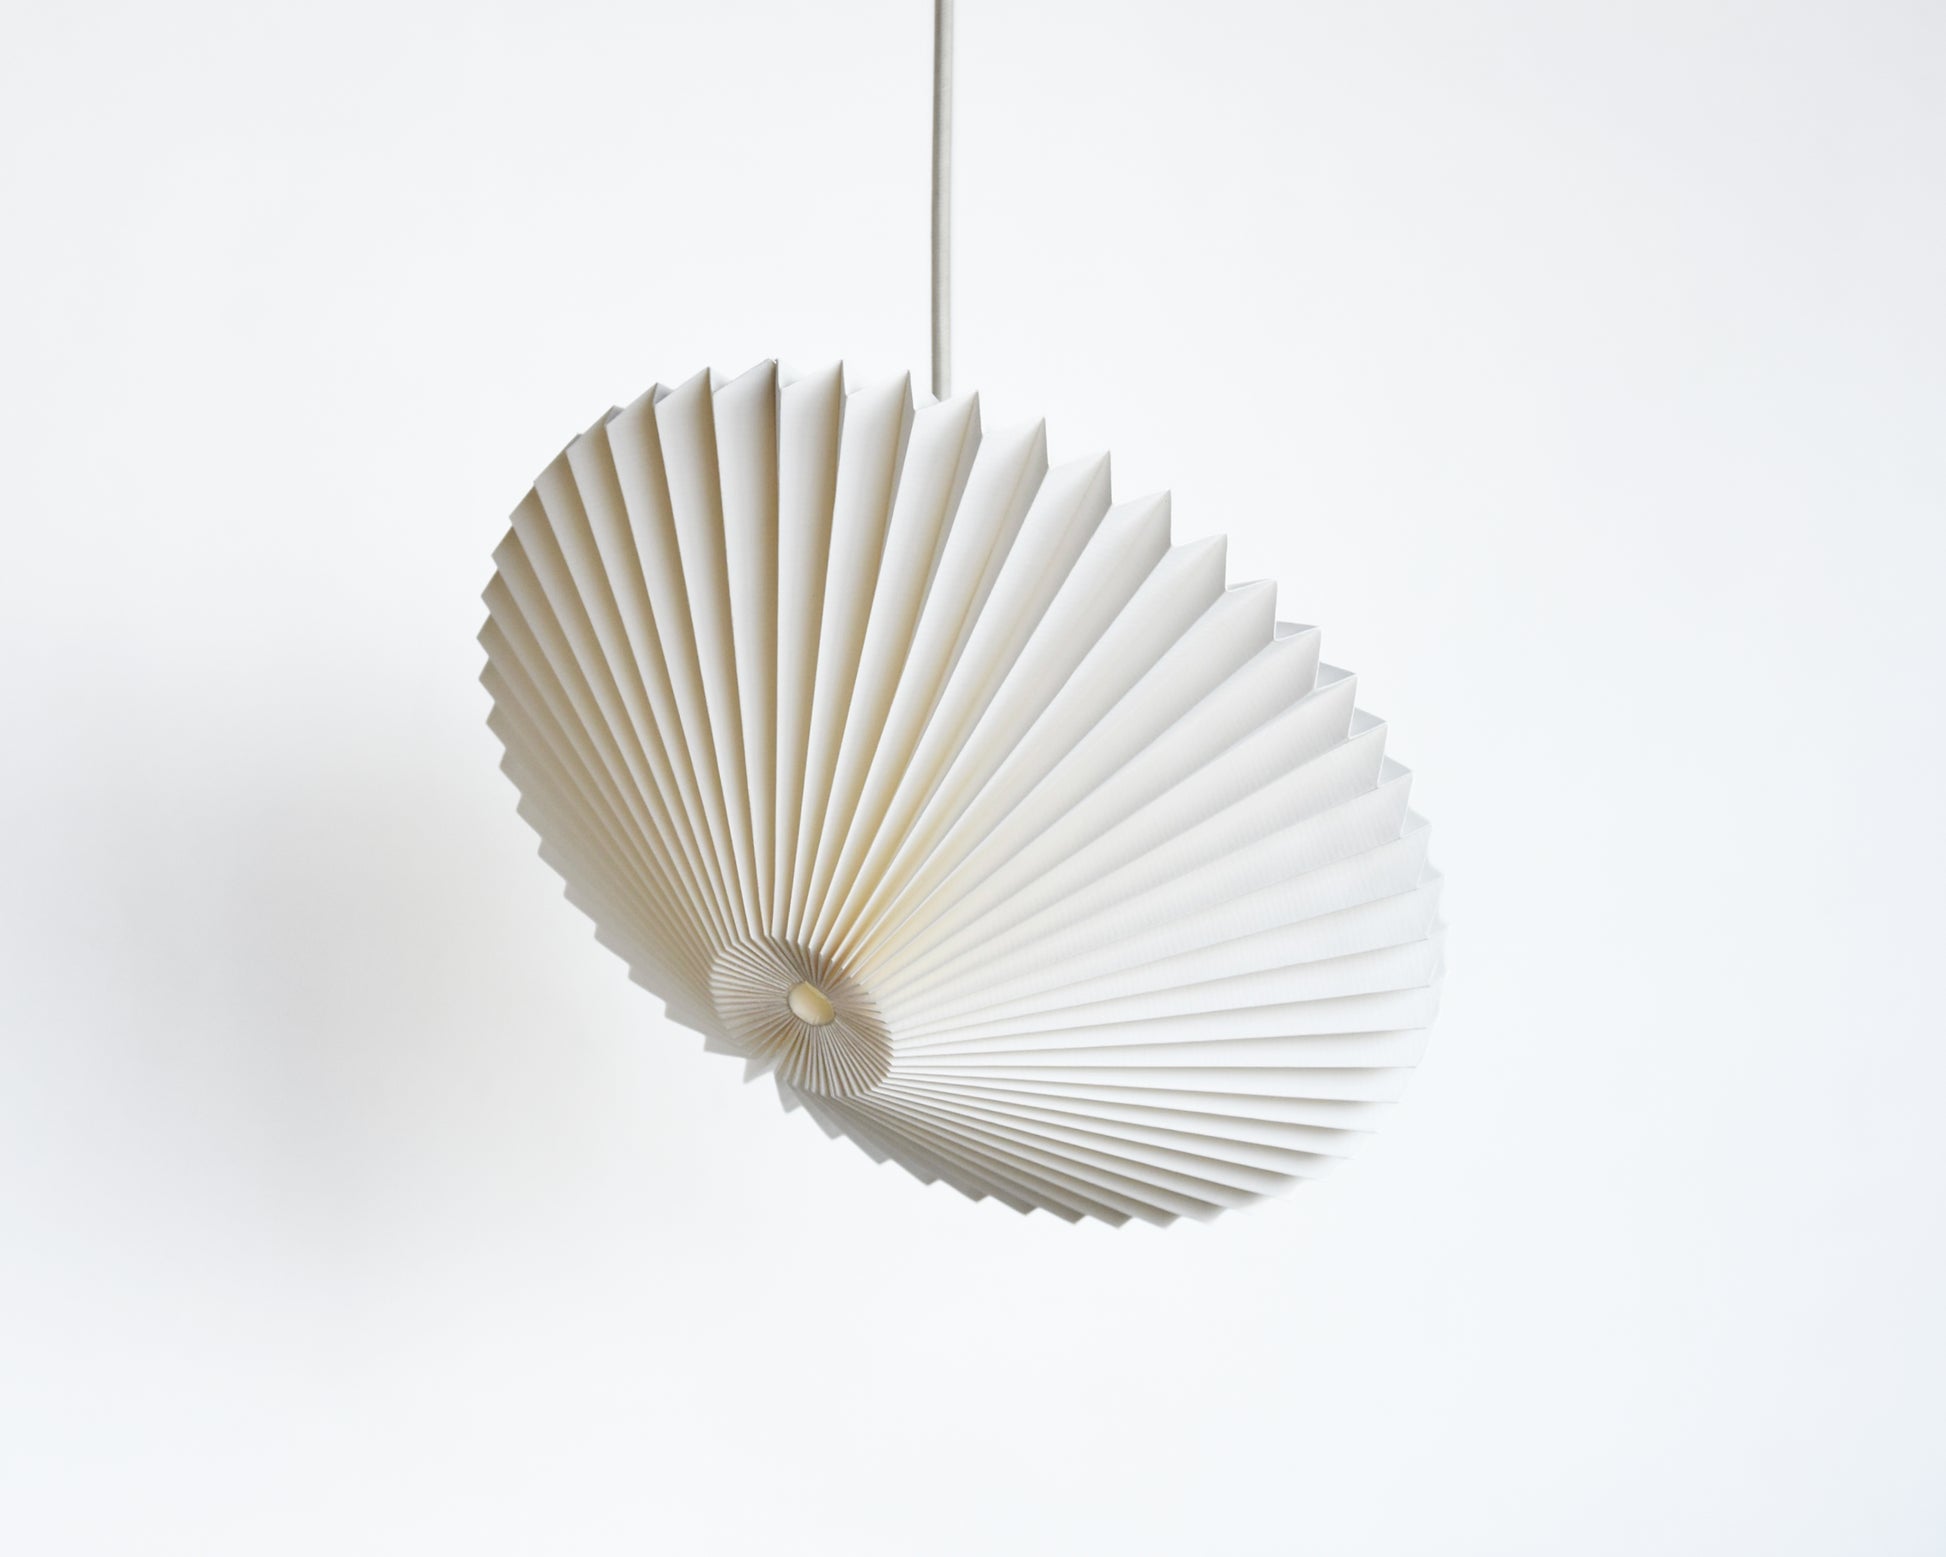 A white pendant lamp made of paper, shaped like a flying saucer